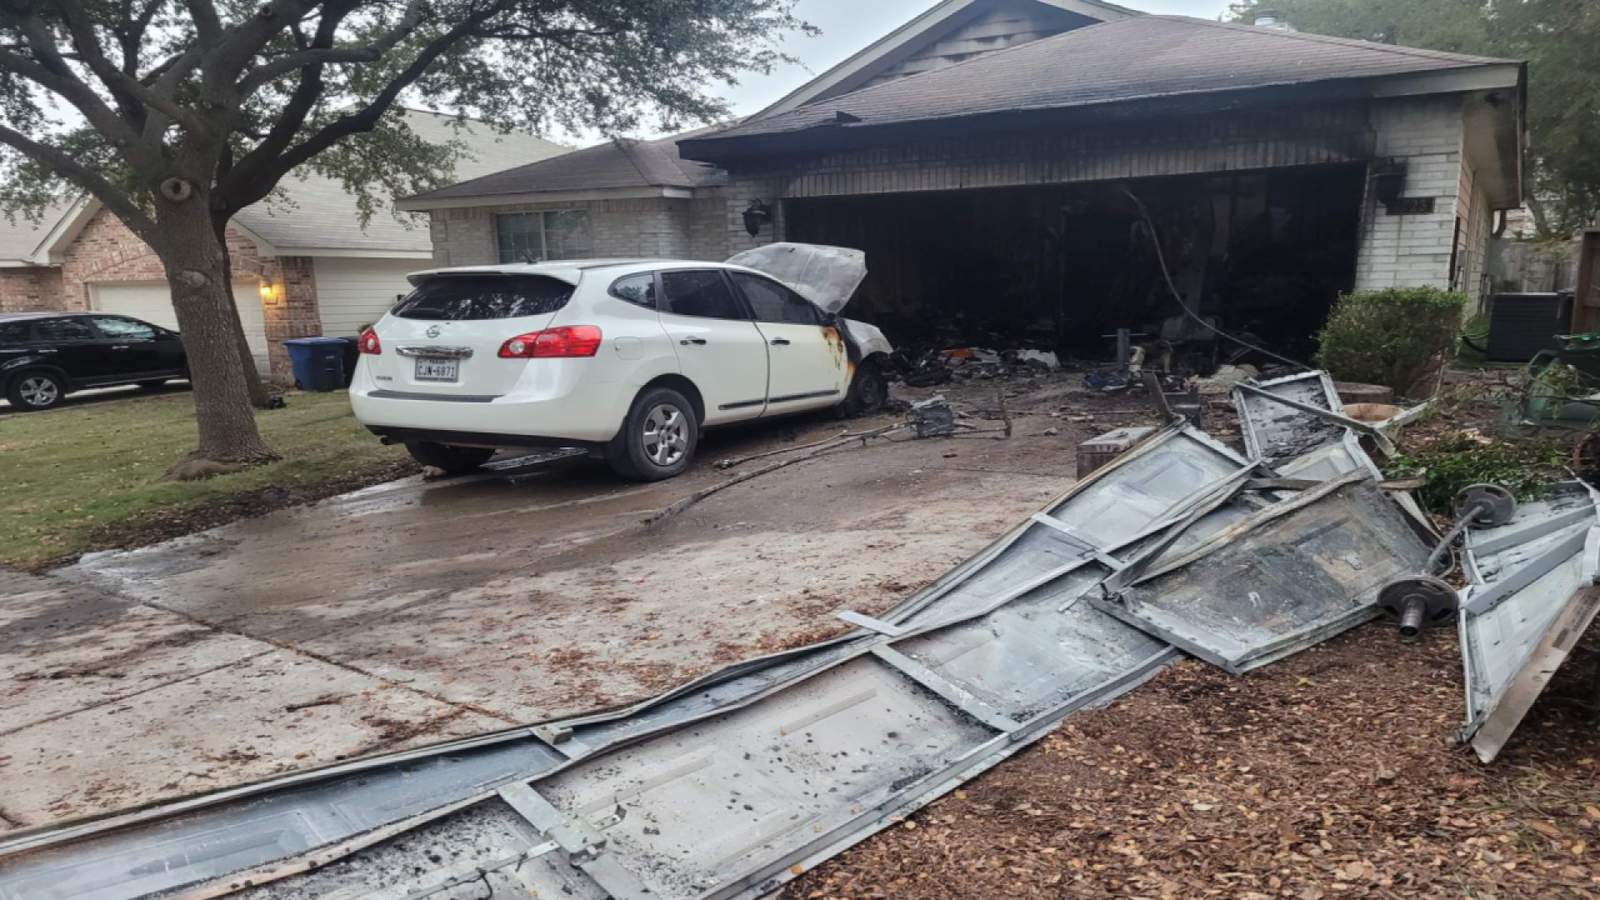 Door inside garage kept fire from spreading to home, firefighters say